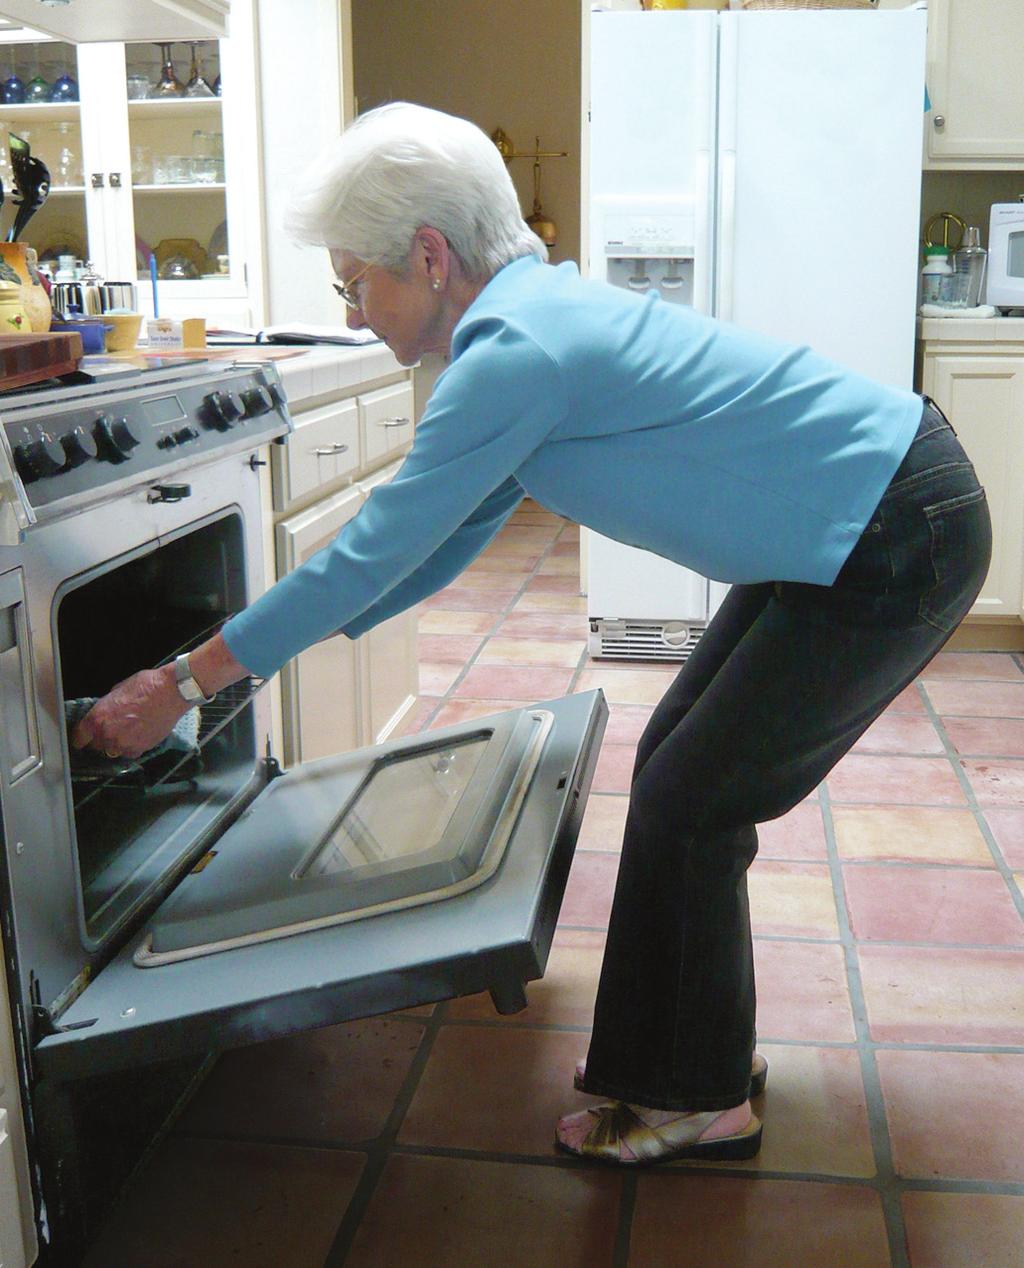 The Oven Keep spine lengthened and straight, chest lifted and knees bent.